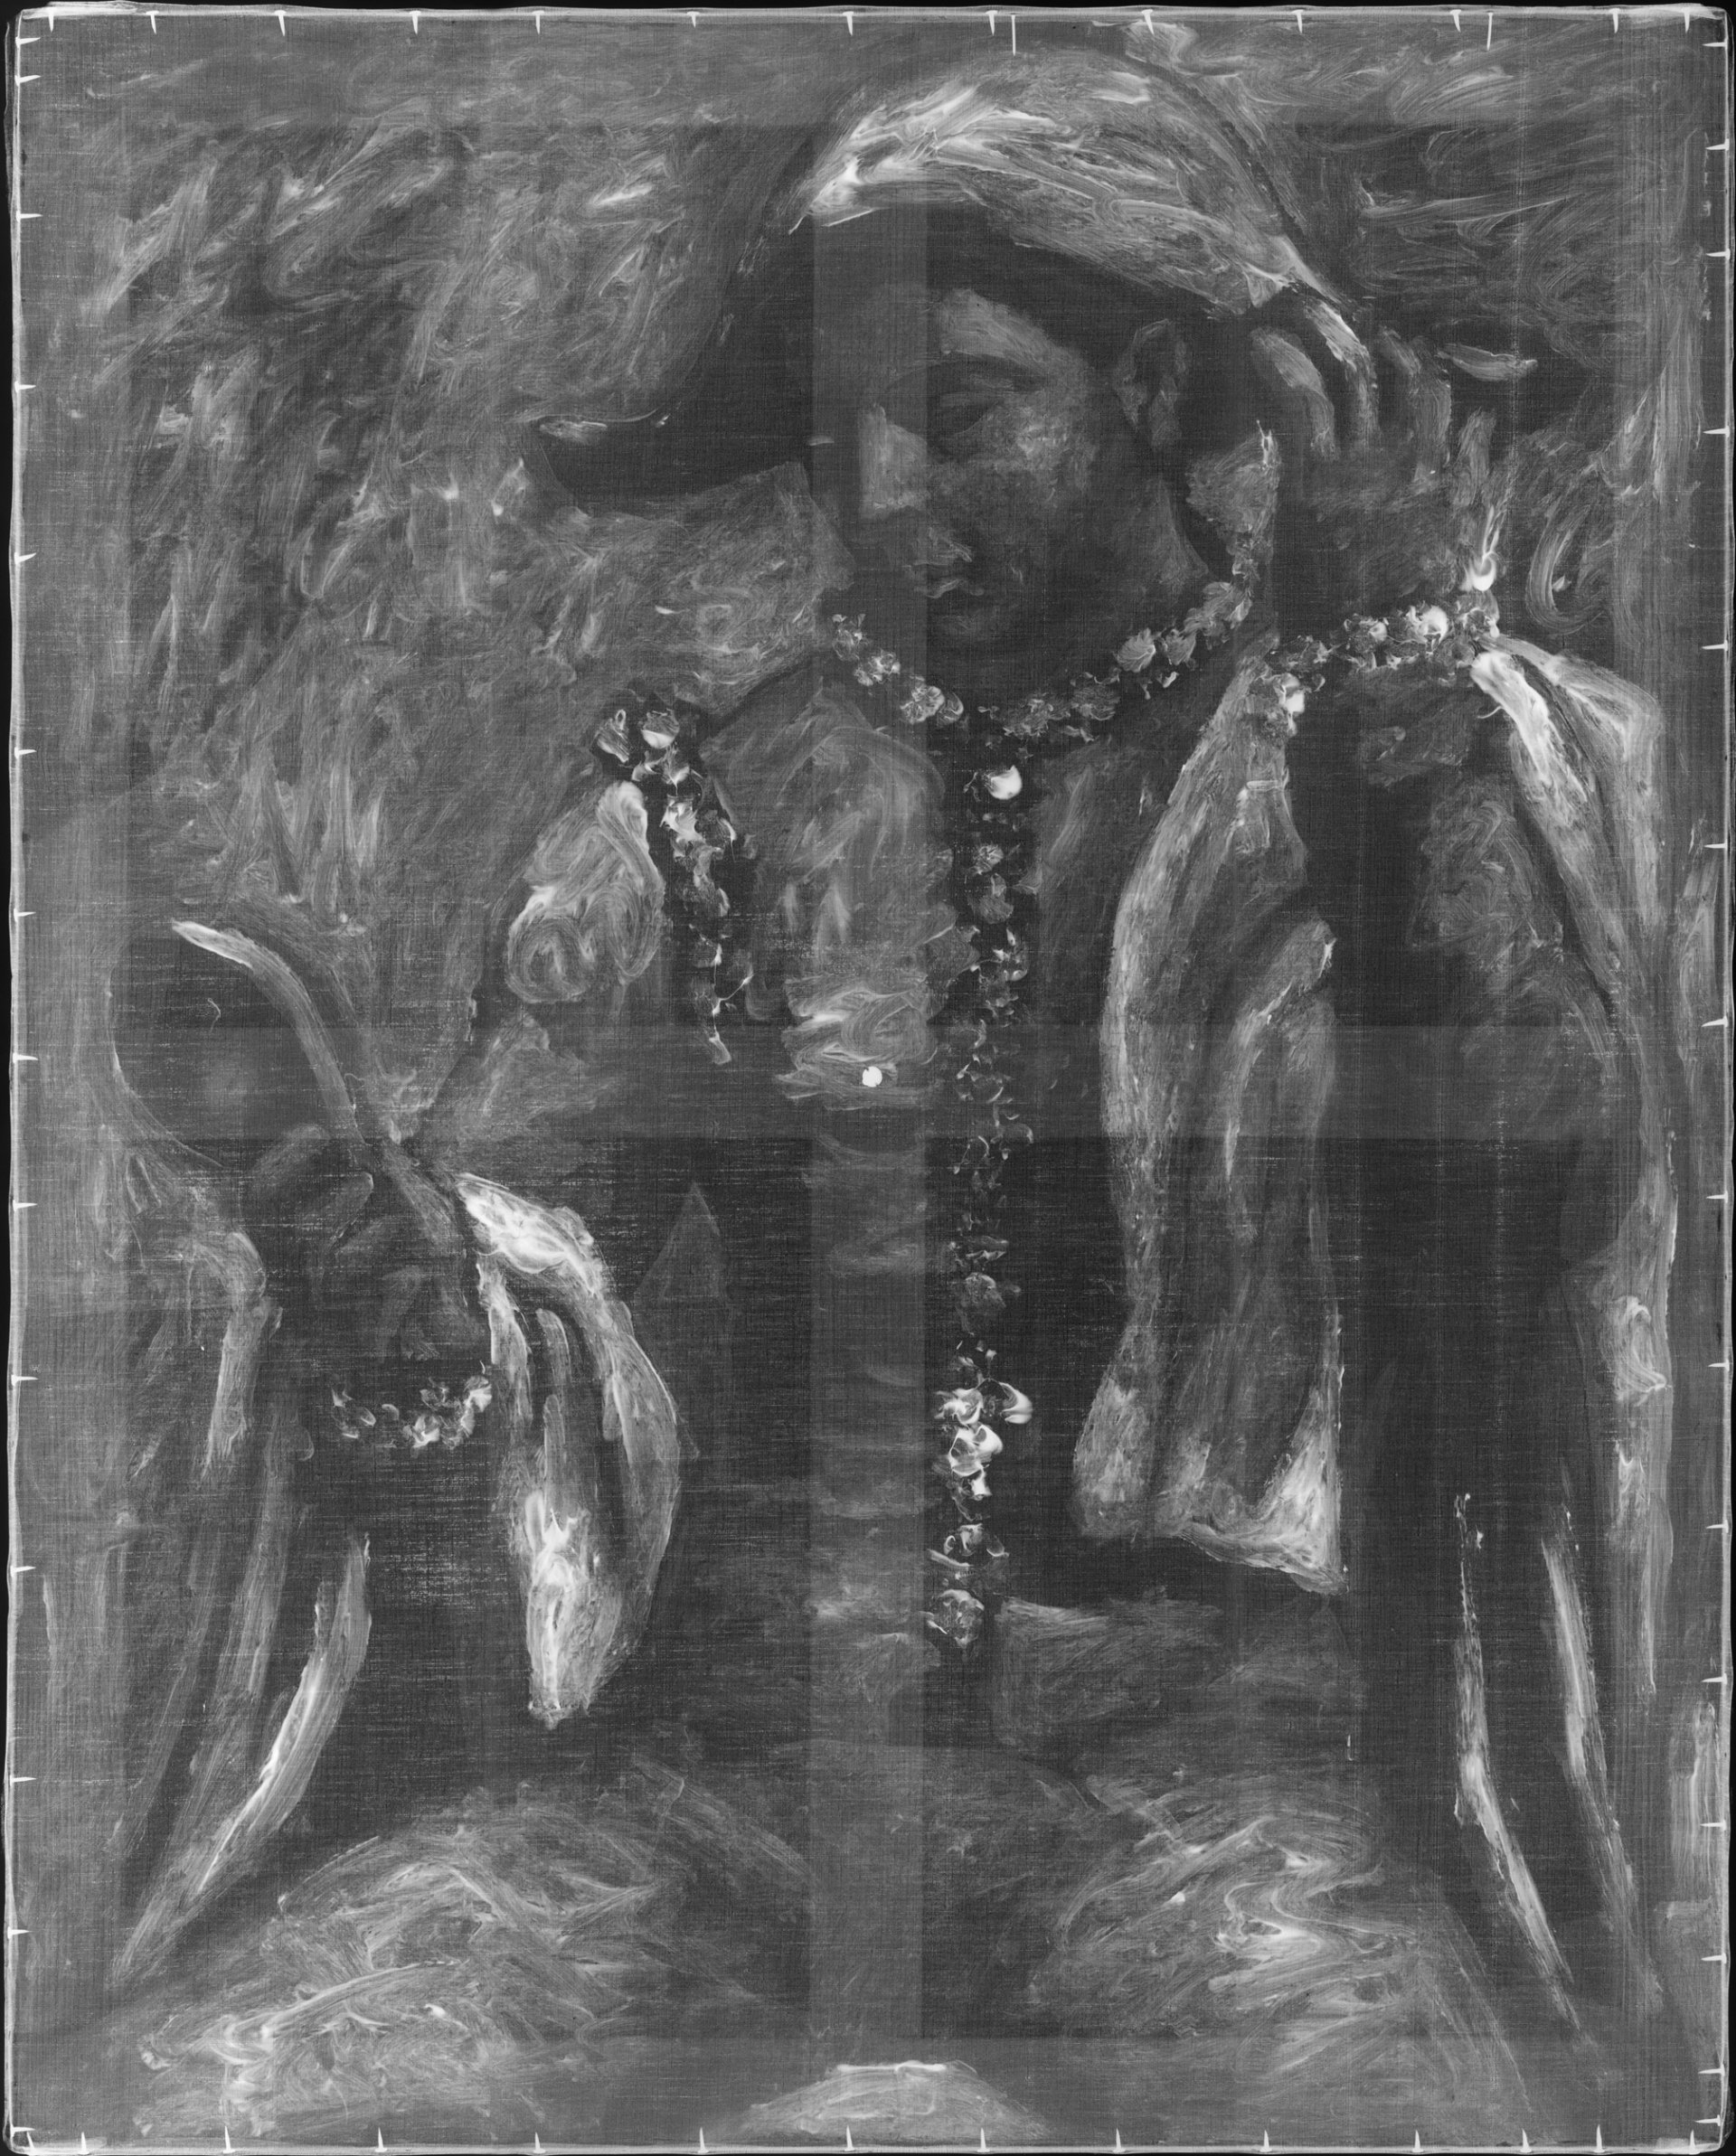 X-ray image of Picasso's "Harlequin with Mirror"